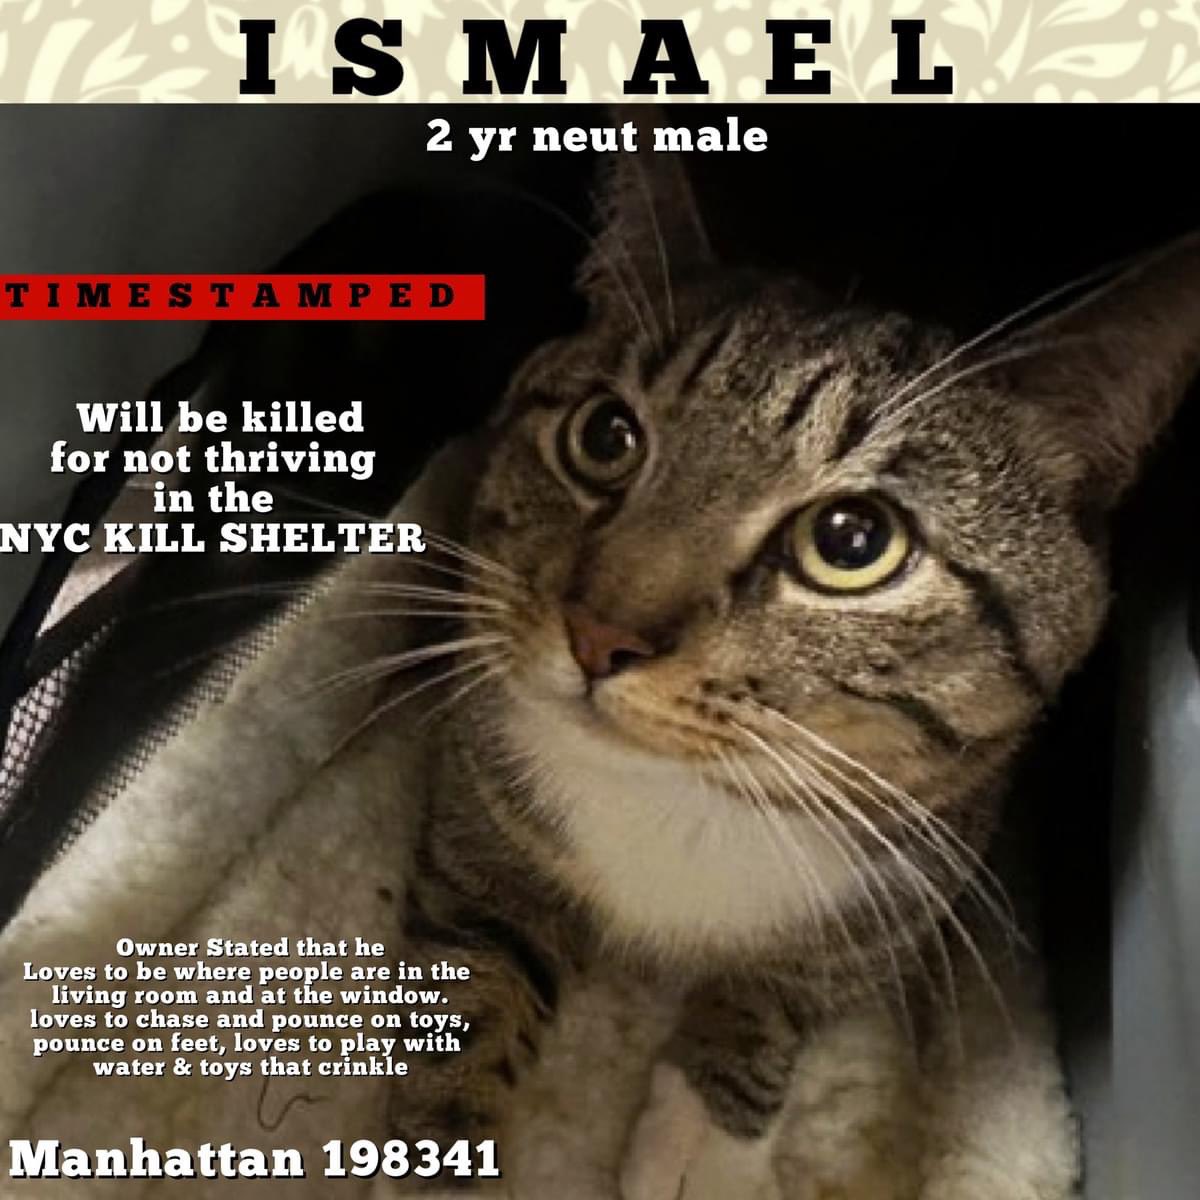 🆘Please RT-adopt-foster! 🆘 ISMAEL is on the “emergency placement” list at #ACCNYC and needs out of the shelter by 12 NOON 5/11! #URGENT #NYC #CATS #NYCACC #TeamKittySOS #AdoptDontShop #CatsOfTwitter newhope.shelterbuddy.com/Animal/Profile…